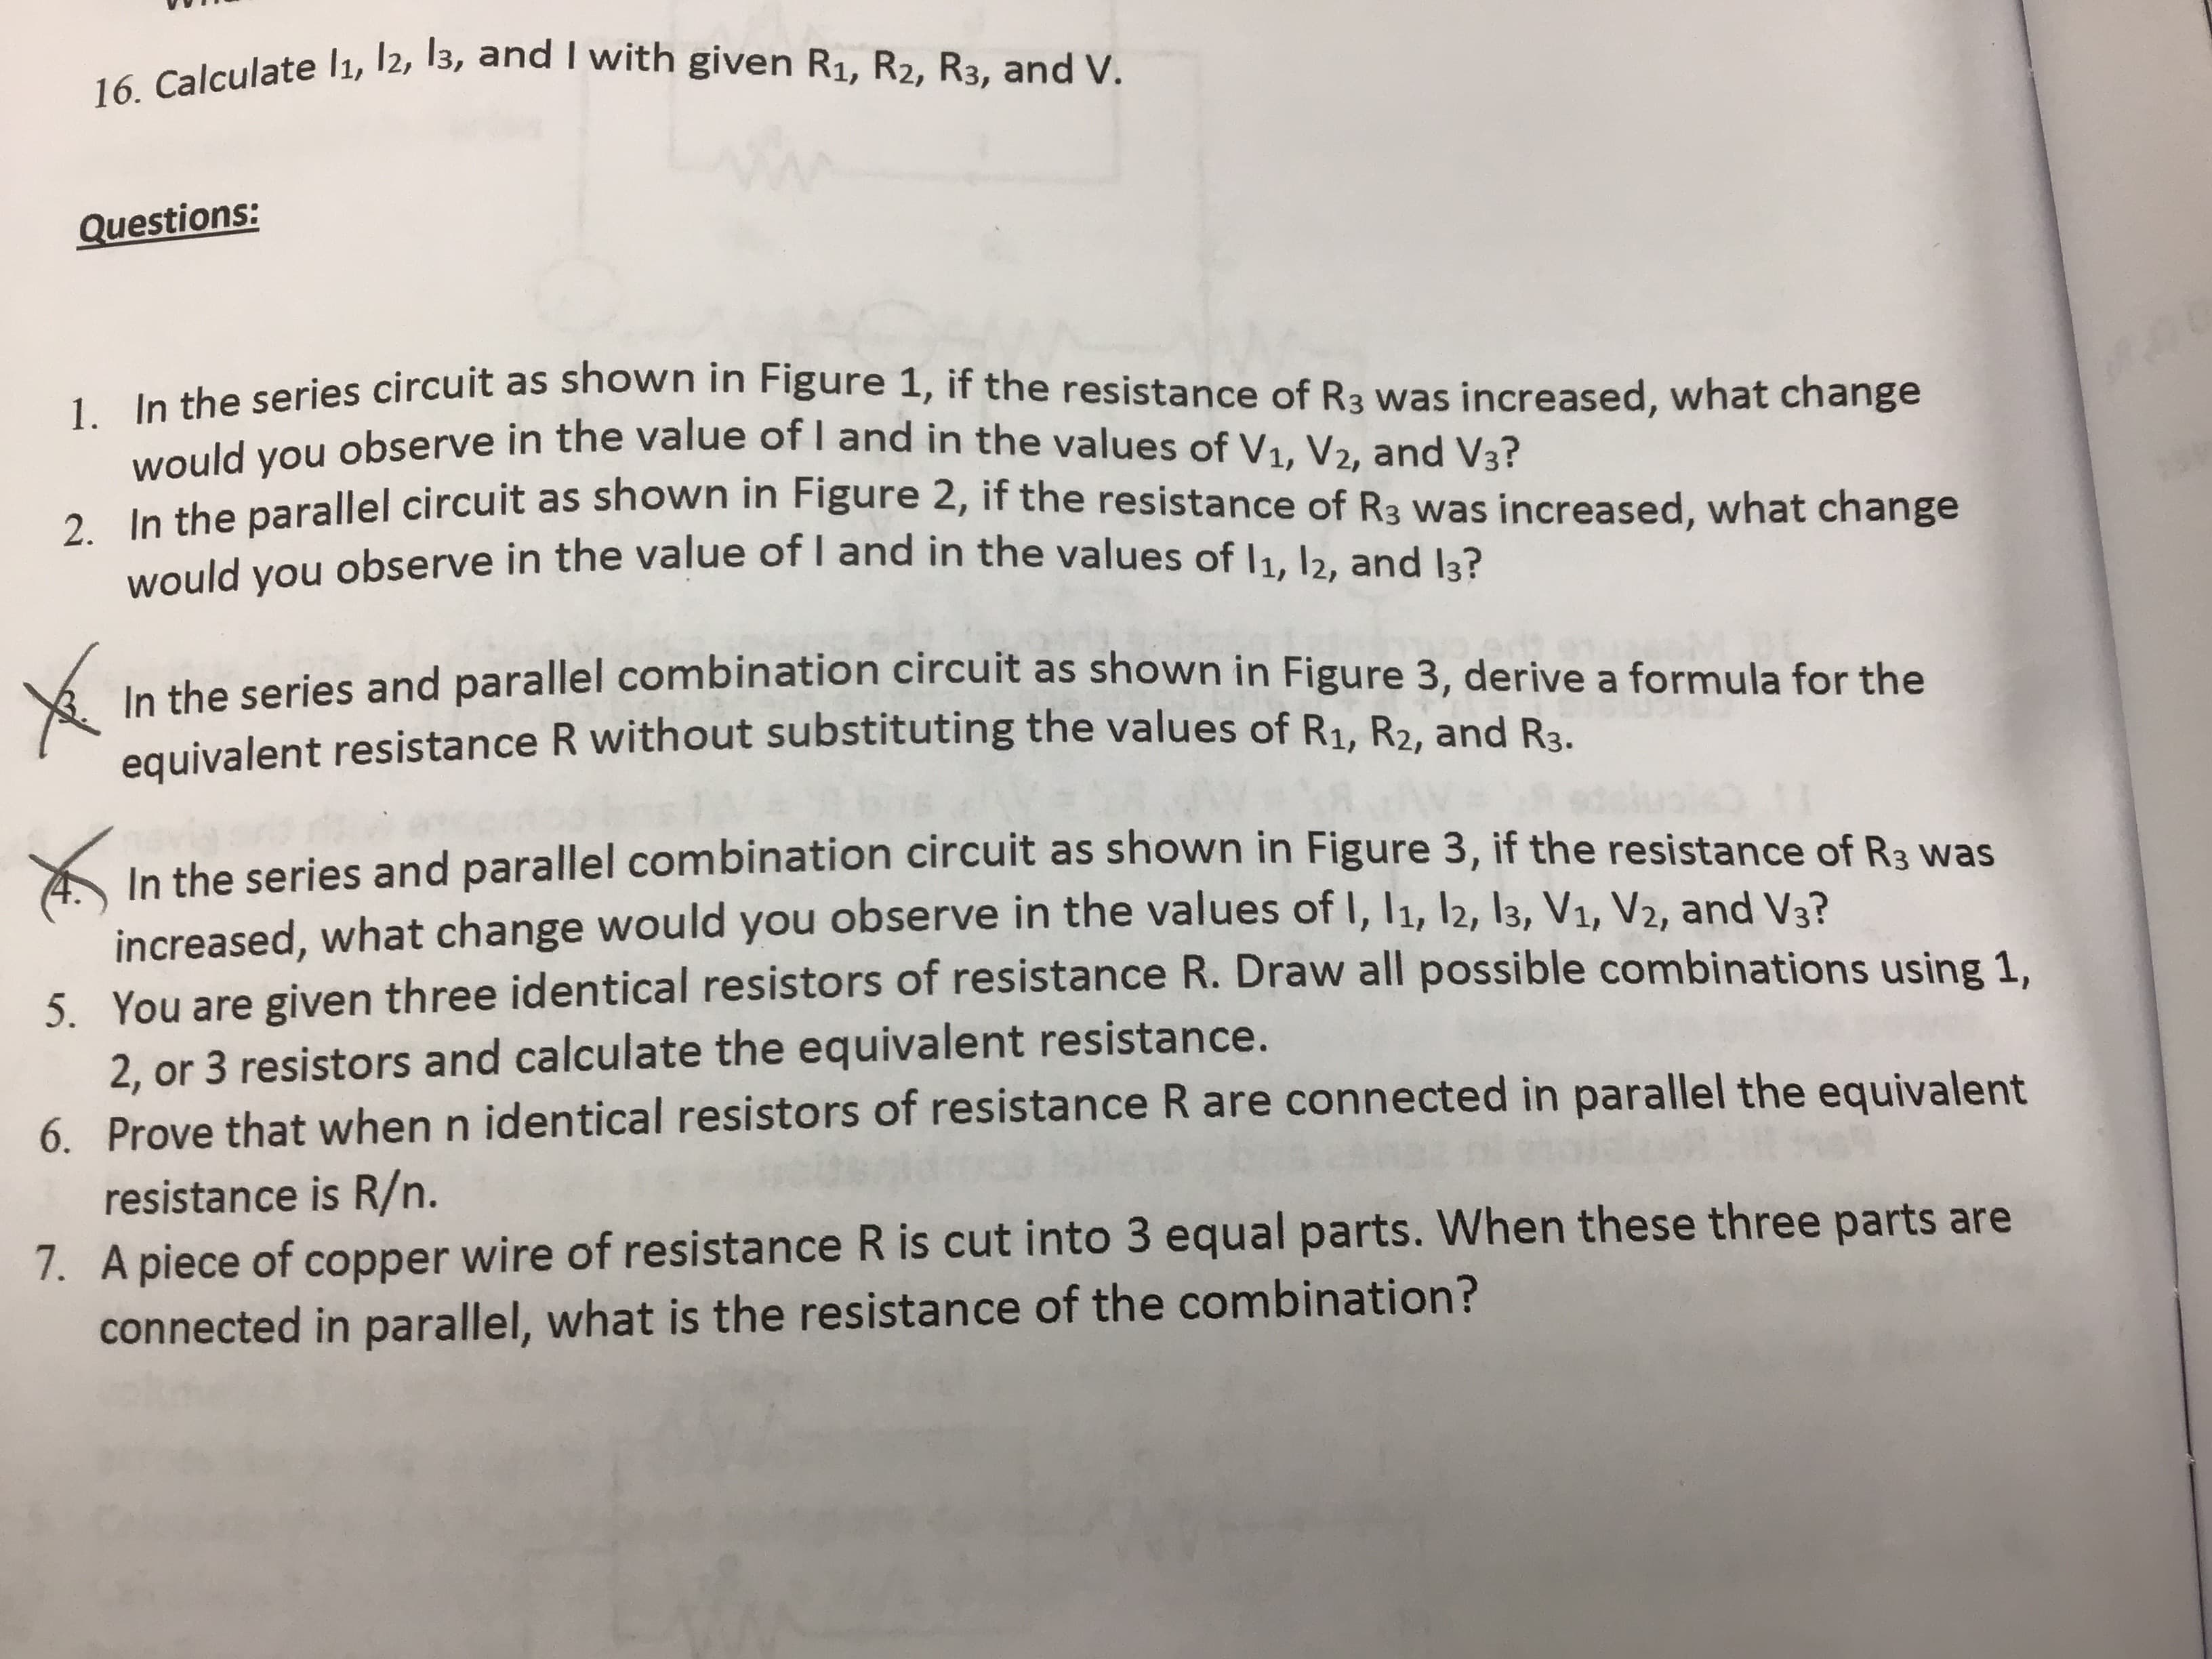 16. Calculate l1, 12, 13, and I with given R1, R2, R3, and V.
Questions:
. le the series circuit as shown in Figure 1, if the resistance of R3 was increased, what change
would you observe in the value of I and in the values of V1, V2, and V3?
A n the parallel circuit as shown in Figure 2, if the resistance of R3 was increased, what change
would
you
observe in the value of I and in the values of 1, 12, and la?
In the series and parallel combination circuit as shown in Figure 3, derive a formula for the
equivalent resistance R without substituting the values of R1, R2, and Ba
In the series and parallel combination circuit as shown in Figure 3, if the resistance of R3 was
increased, what change would you observe in the values of I, 11, l2, 13, V1, V2, and V3?
5. You are given three identical resistors of resistance R. Draw all possible combinations using 1,
2, or 3 resistors and calculate the equivalent resistance.
6. Prove that when n identical resistors of resistance R are connected in parallel the equivalent
resistance is R/n.
7. A piece of copper wire of resistance R is cut into 3 equal parts. When these three parts are
connected in parallel, what is the resistance of the combination?
